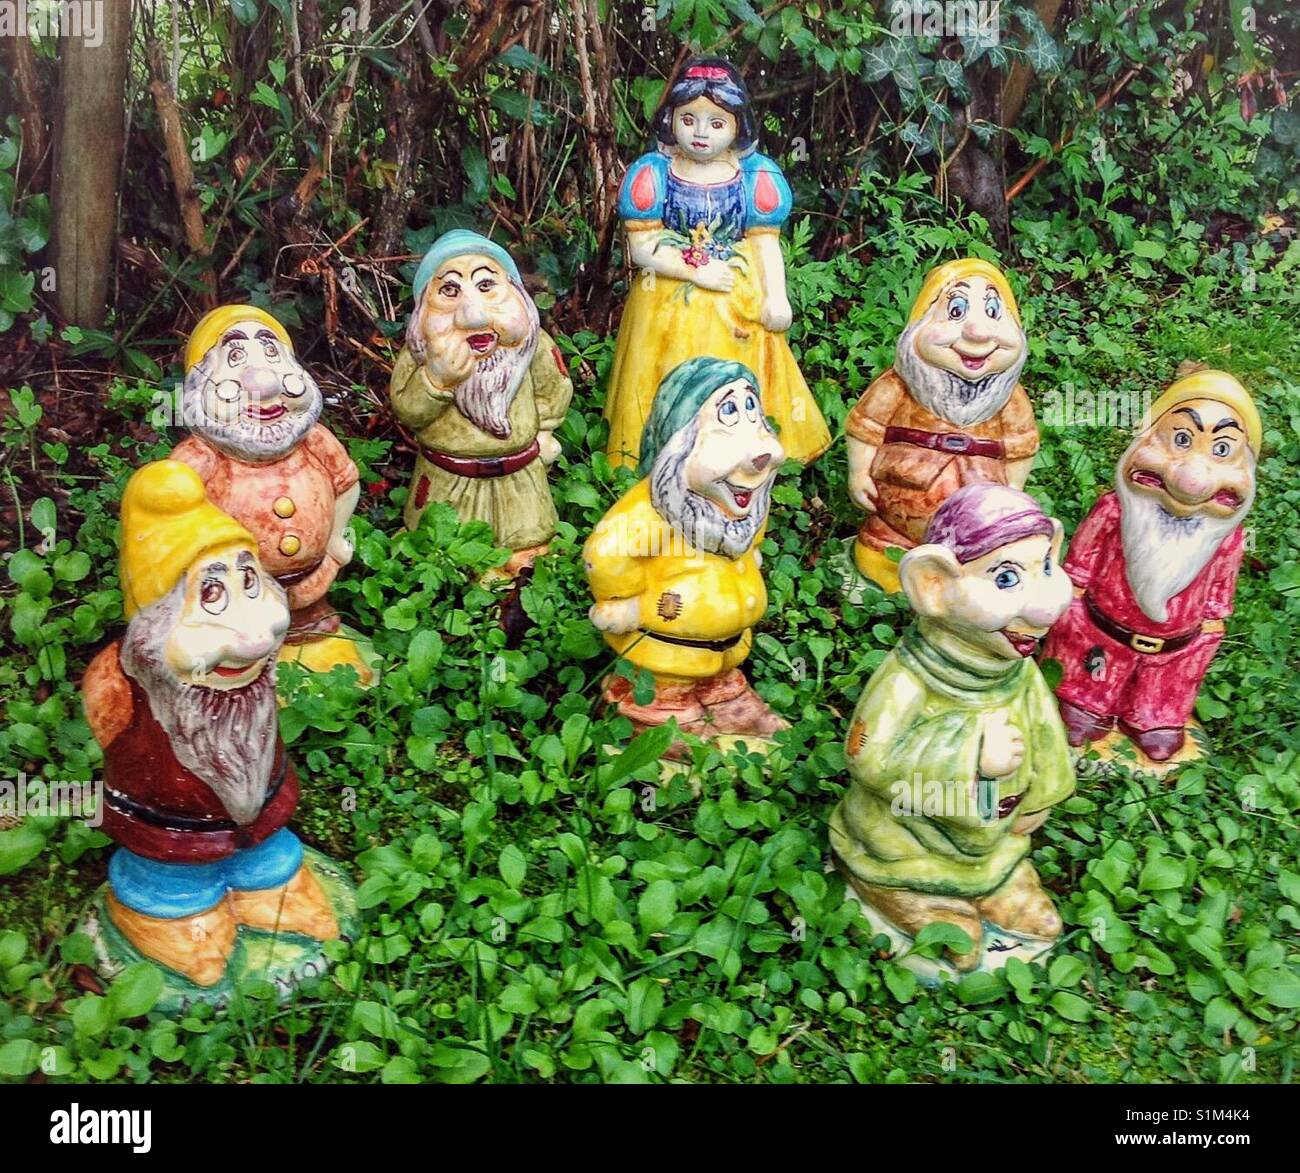 Snow White and the Seven Dwarfs figurines. Stock Photo